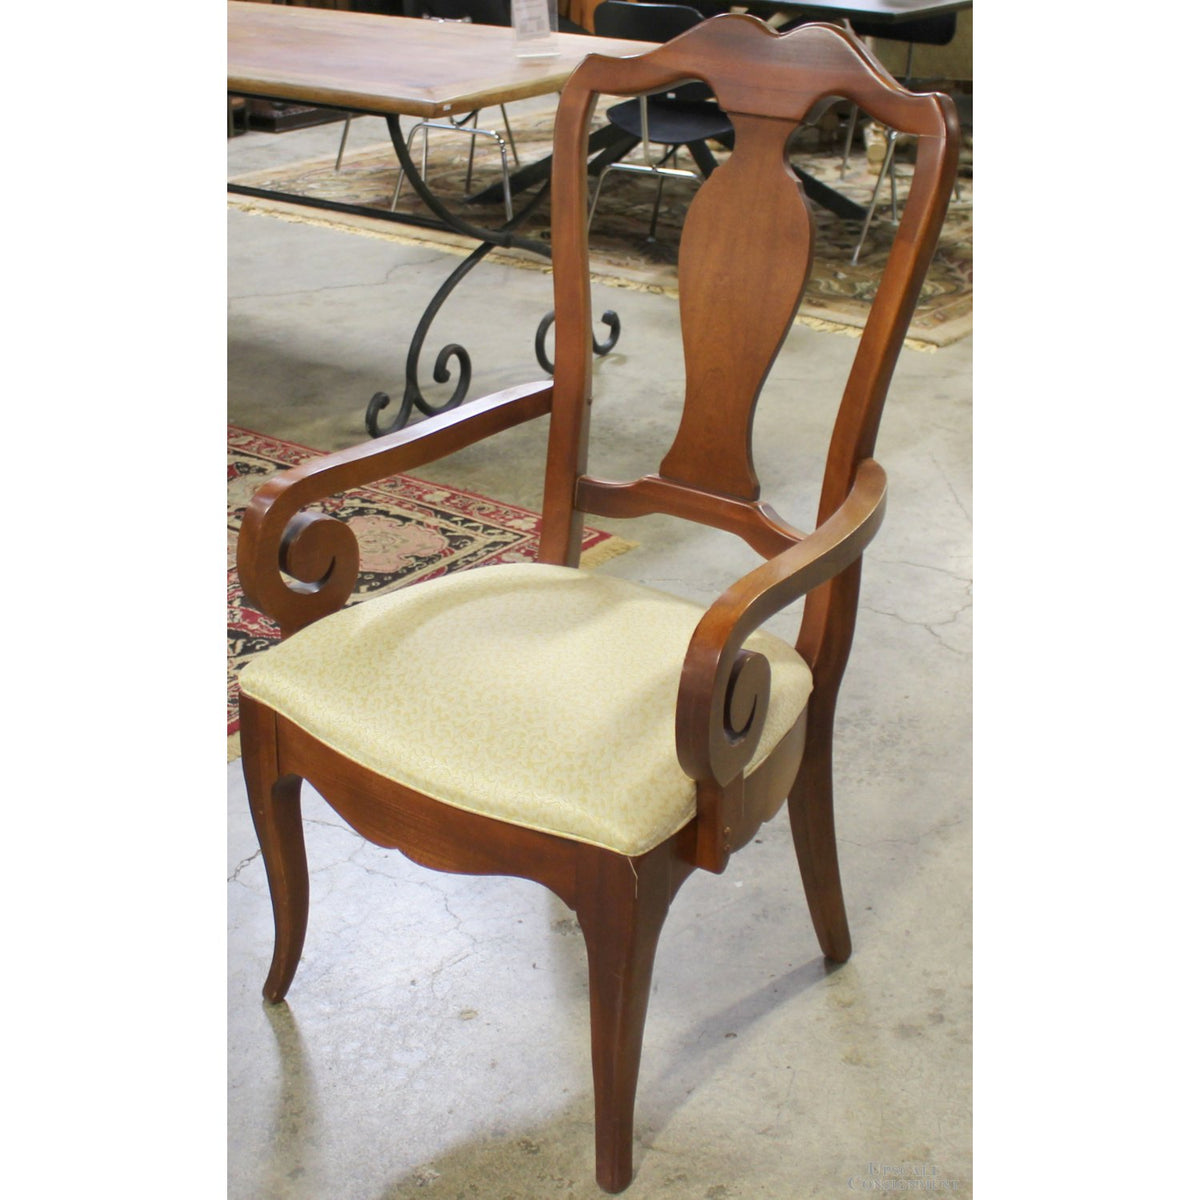 Thomasville Dining Table w/6 Chairs